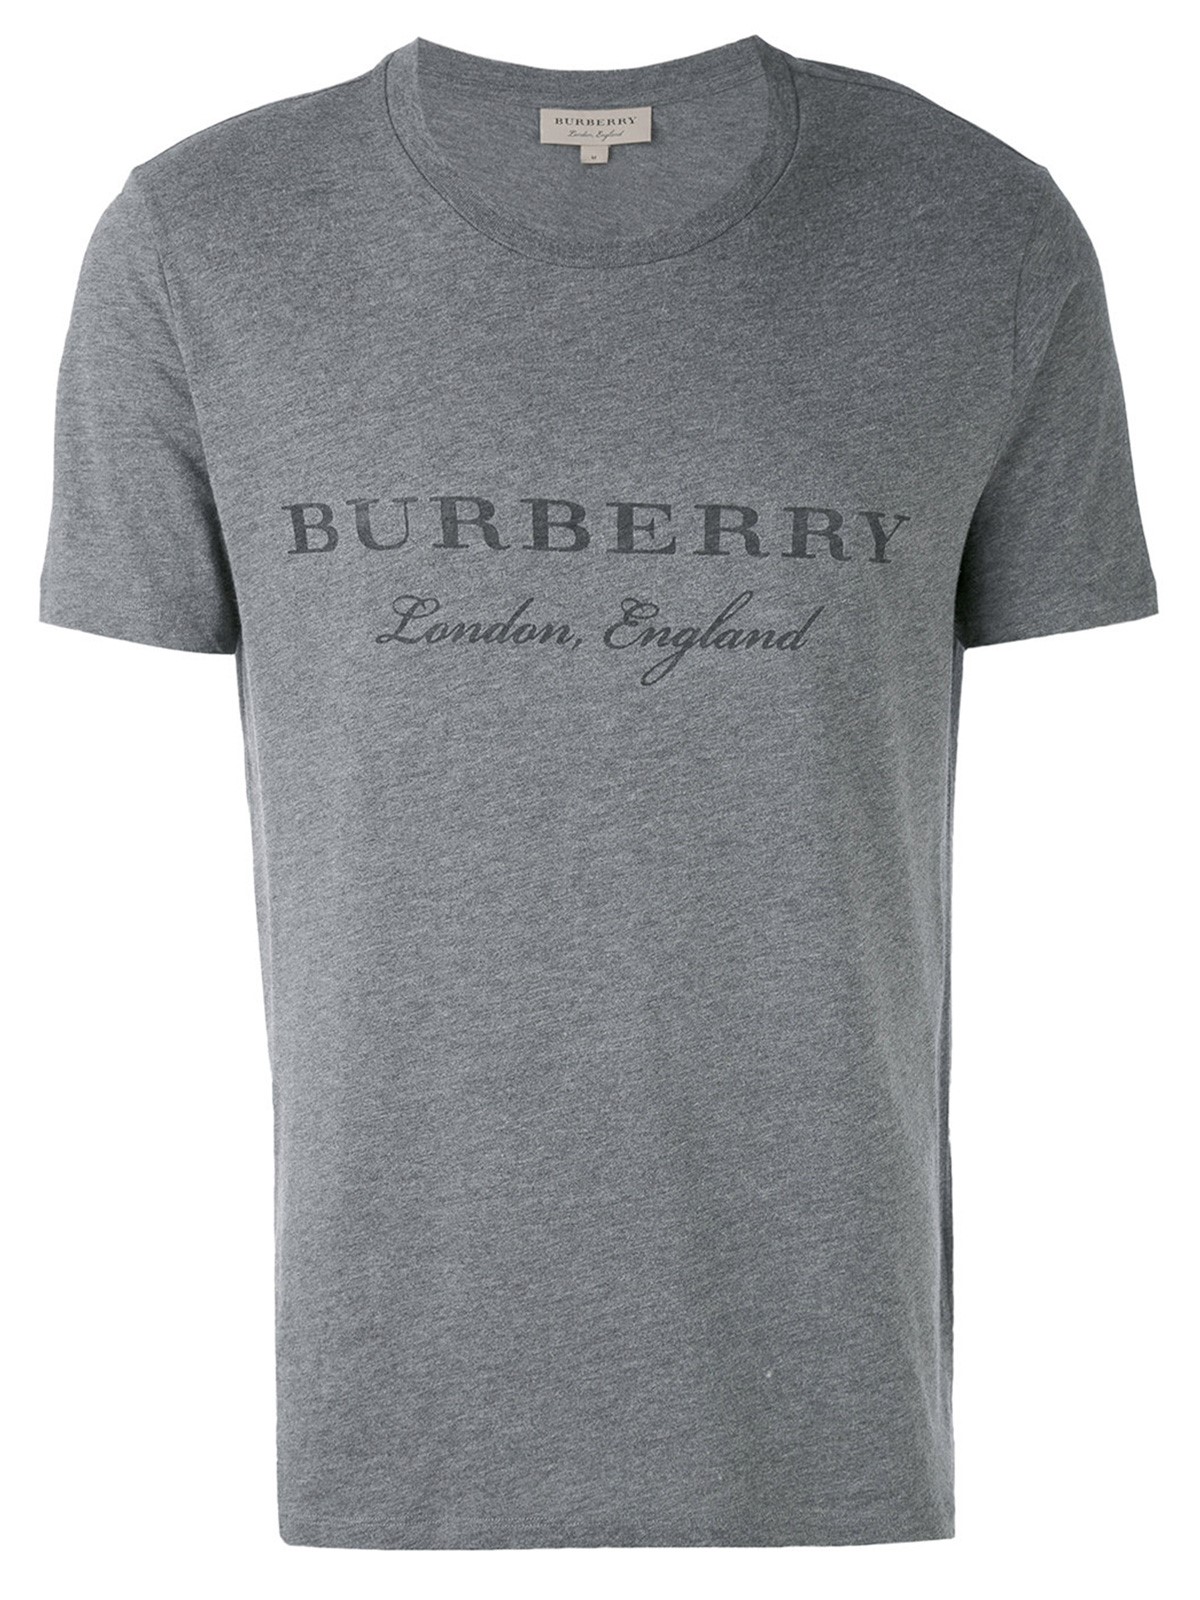 burberry LOGO T-SHIRT available on